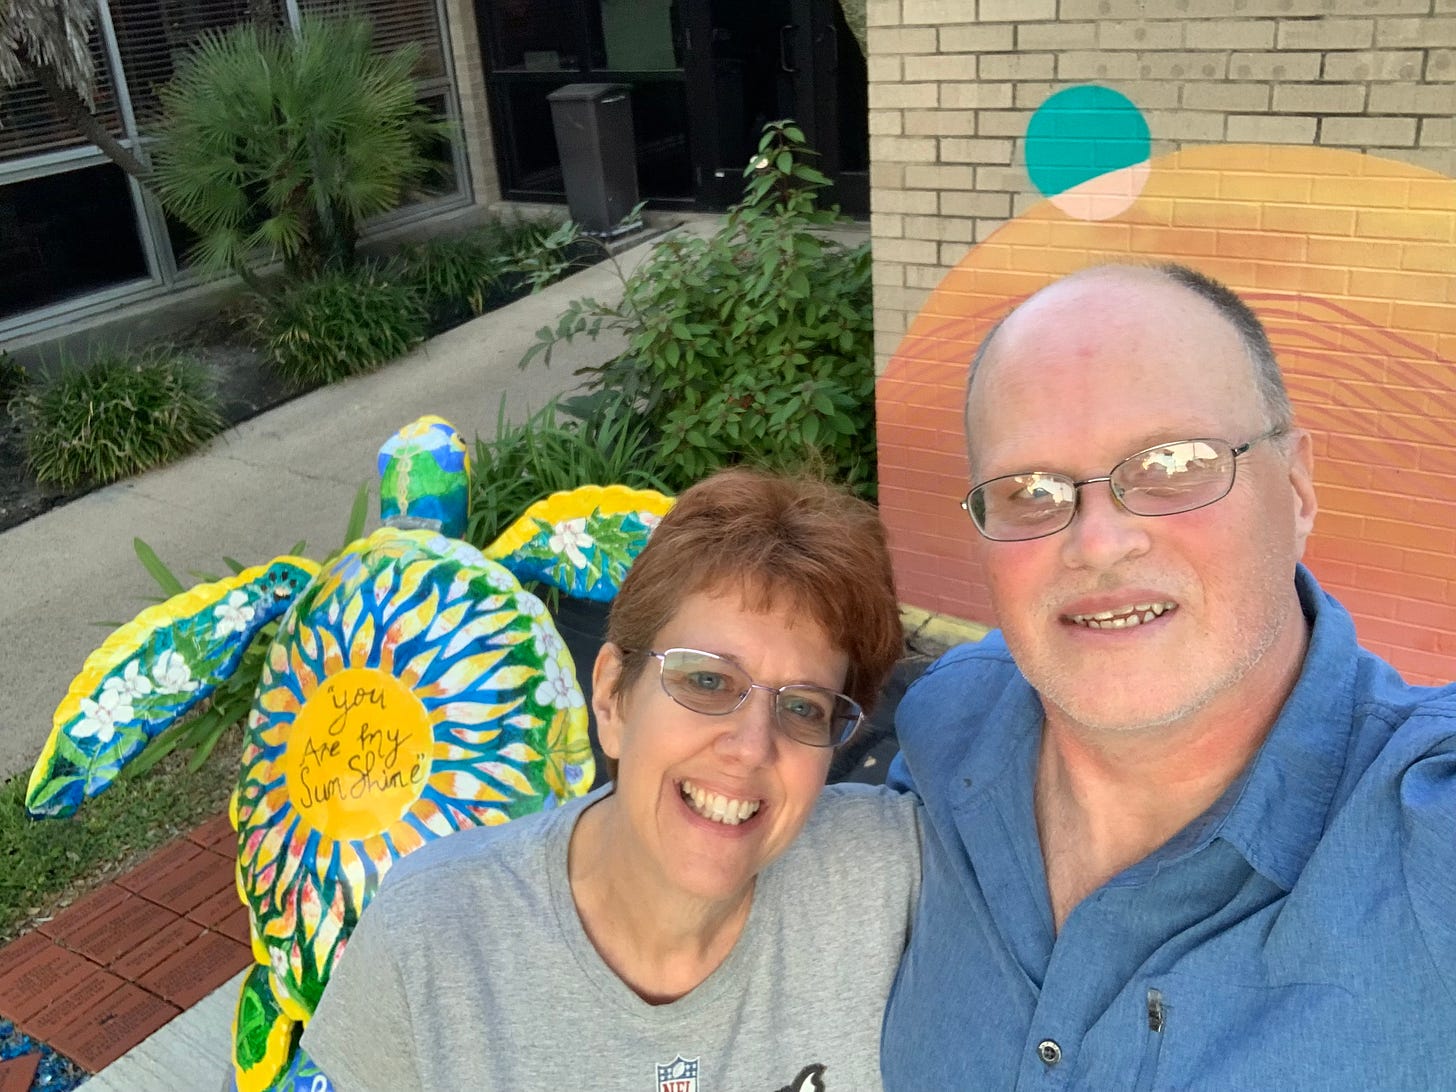 Author Wendi Gordon with her husband Steve next to a colorful sea turtle sculpture with "You are my sunshine" painted on it